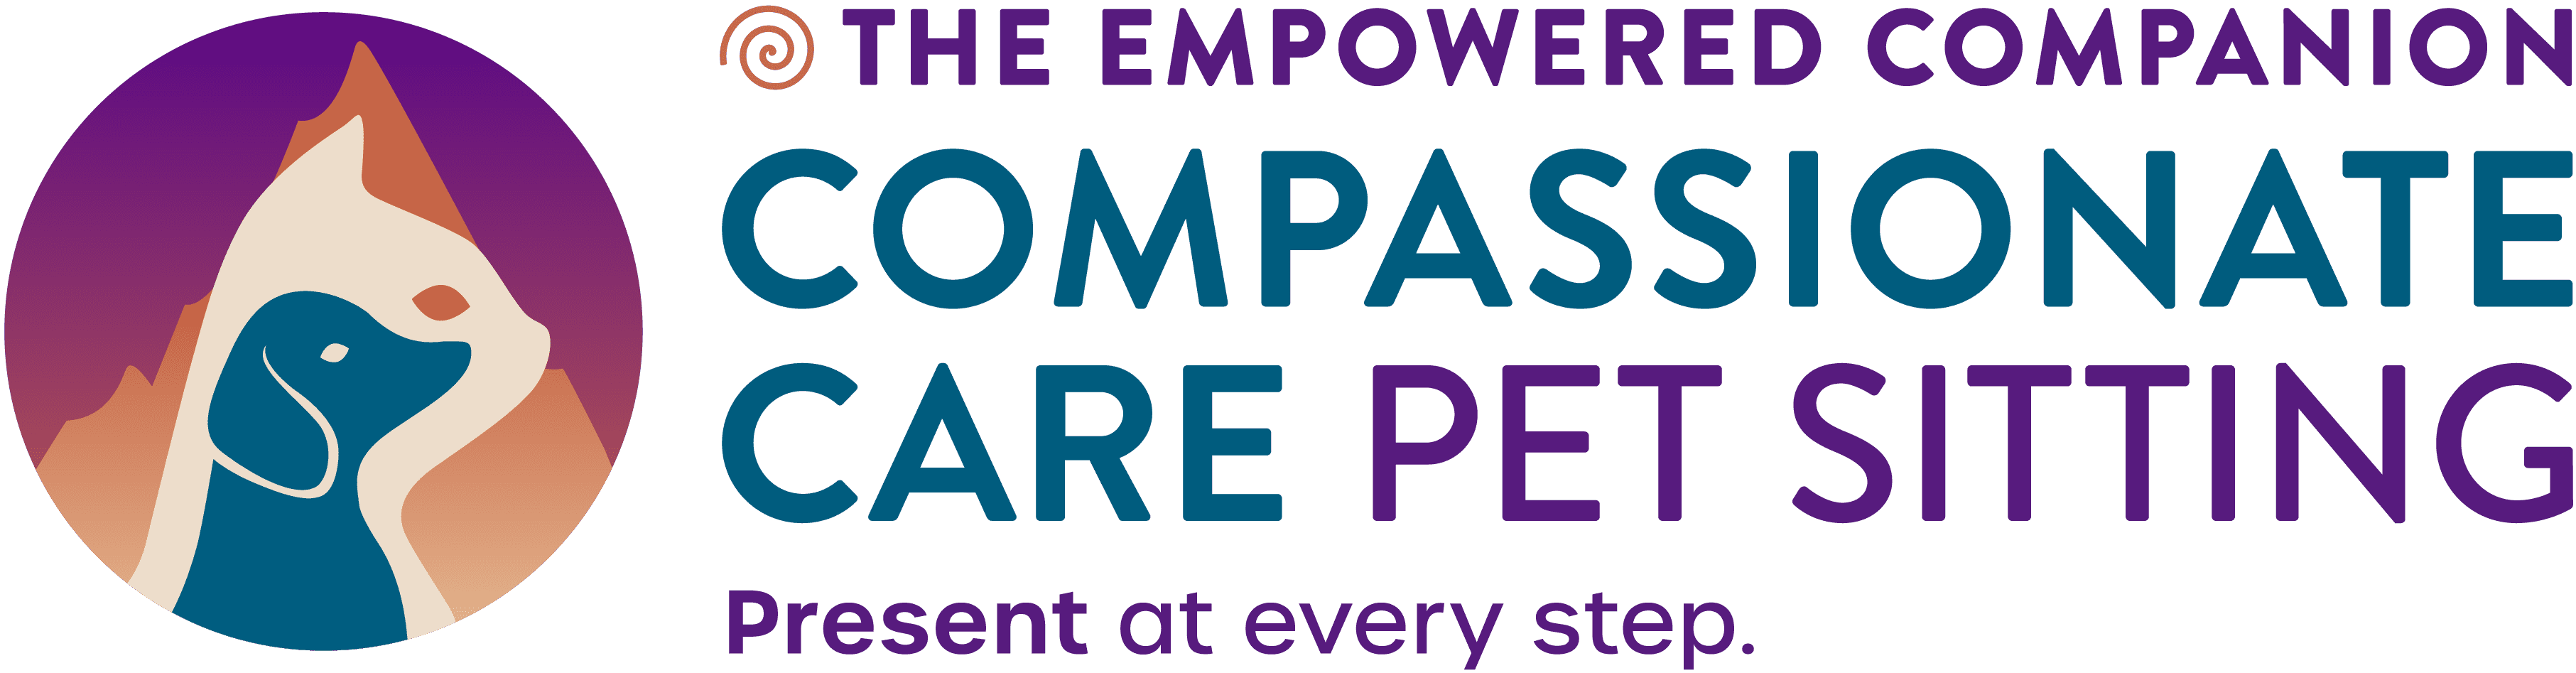 Compassionate Care Pet Sitting @ The Empowered Companion